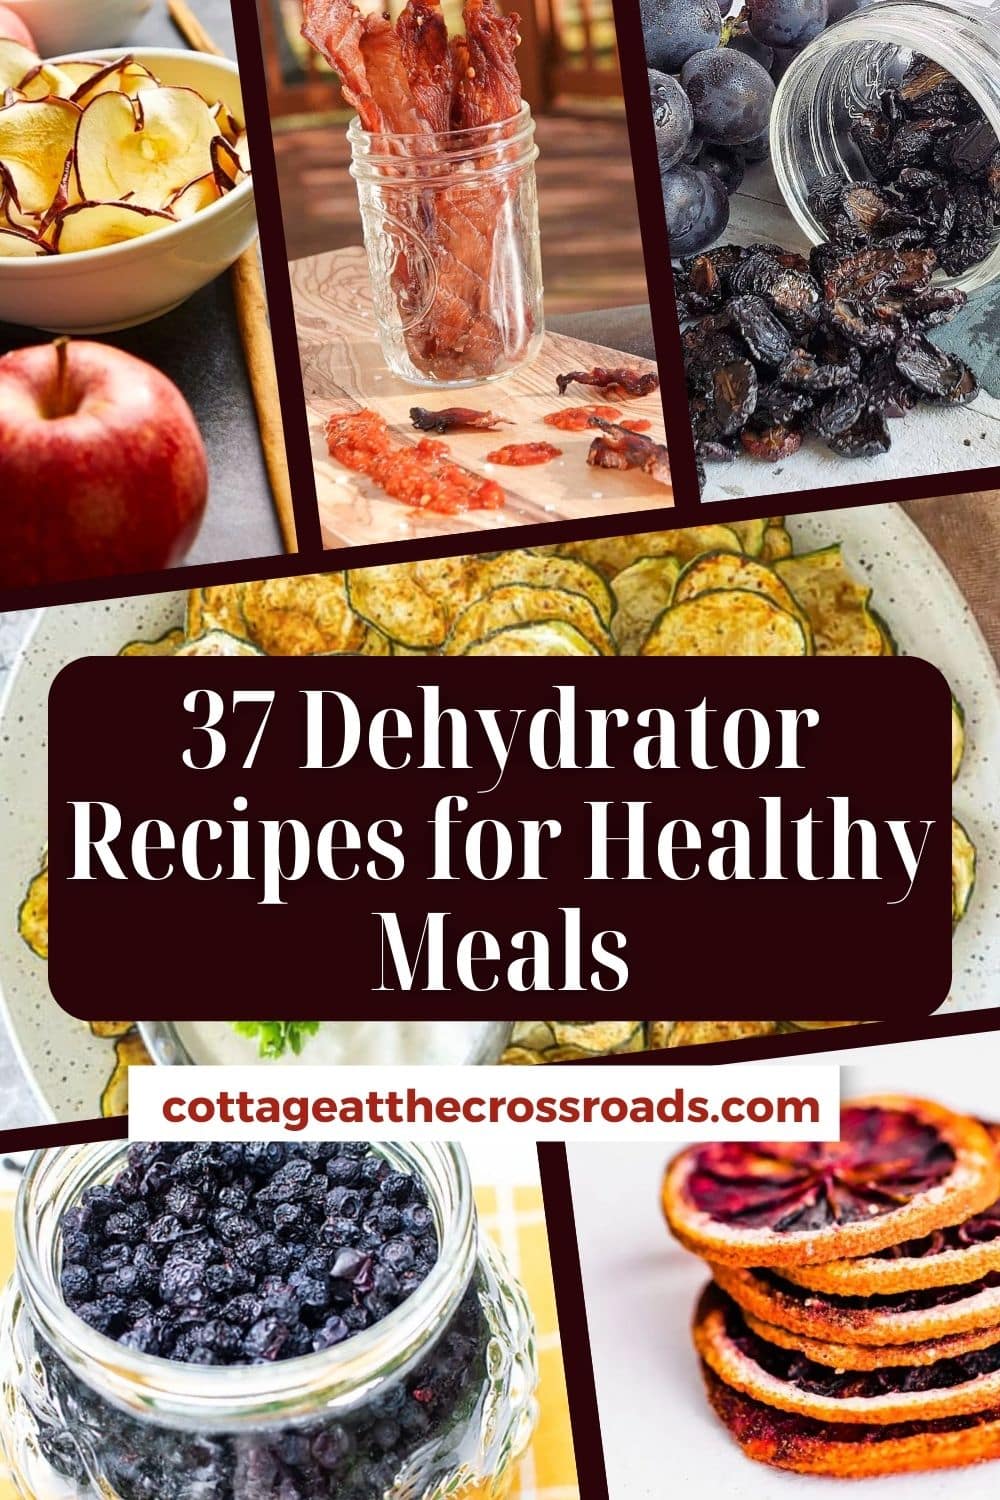 37 Dehydrator Recipes for Healthy Snacks - Cottage at the Crossroads